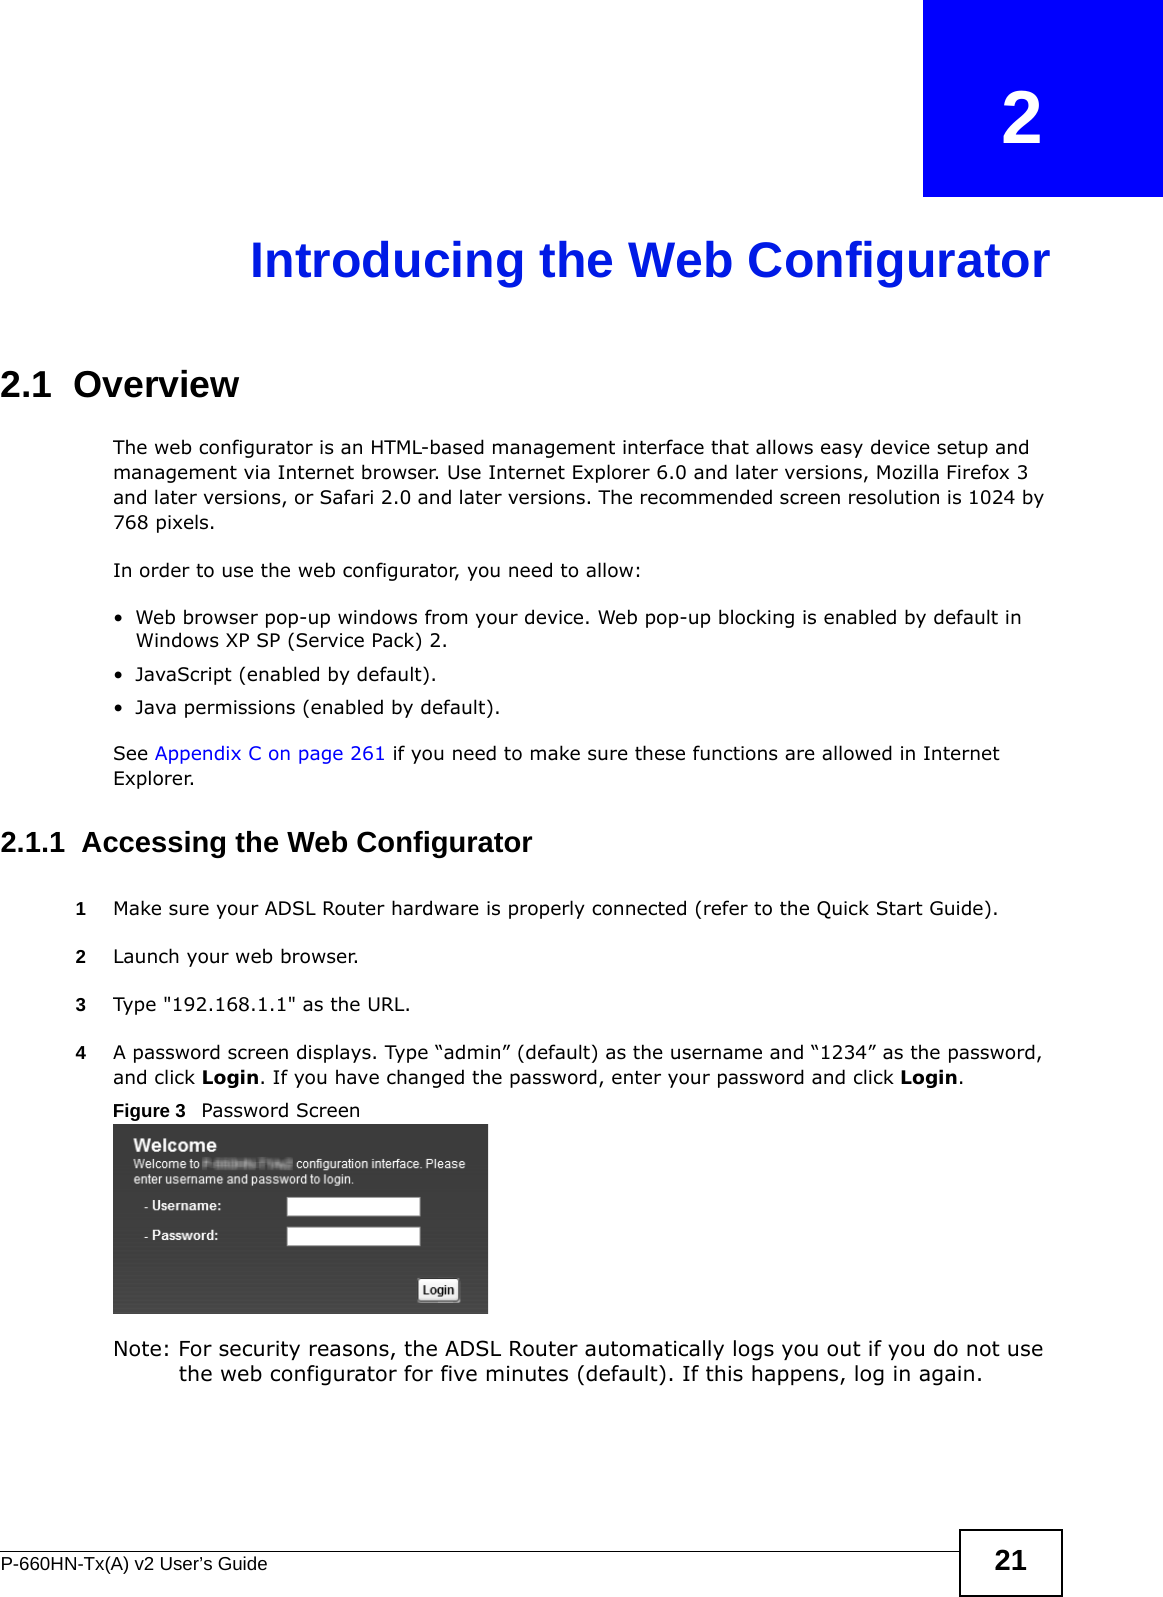 P-660HN-Tx(A) v2 User’s Guide 21CHAPTER   2Introducing the Web Configurator2.1  OverviewThe web configurator is an HTML-based management interface that allows easy device setup and management via Internet browser. Use Internet Explorer 6.0 and later versions, Mozilla Firefox 3 and later versions, or Safari 2.0 and later versions. The recommended screen resolution is 1024 by 768 pixels.In order to use the web configurator, you need to allow:• Web browser pop-up windows from your device. Web pop-up blocking is enabled by default in Windows XP SP (Service Pack) 2.• JavaScript (enabled by default).• Java permissions (enabled by default).See Appendix C on page 261 if you need to make sure these functions are allowed in Internet Explorer.2.1.1  Accessing the Web Configurator1Make sure your ADSL Router hardware is properly connected (refer to the Quick Start Guide).2Launch your web browser.3Type &quot;192.168.1.1&quot; as the URL.4A password screen displays. Type “admin” (default) as the username and “1234” as the password, and click Login. If you have changed the password, enter your password and click Login. Figure 3   Password ScreenNote: For security reasons, the ADSL Router automatically logs you out if you do not use the web configurator for five minutes (default). If this happens, log in again. 